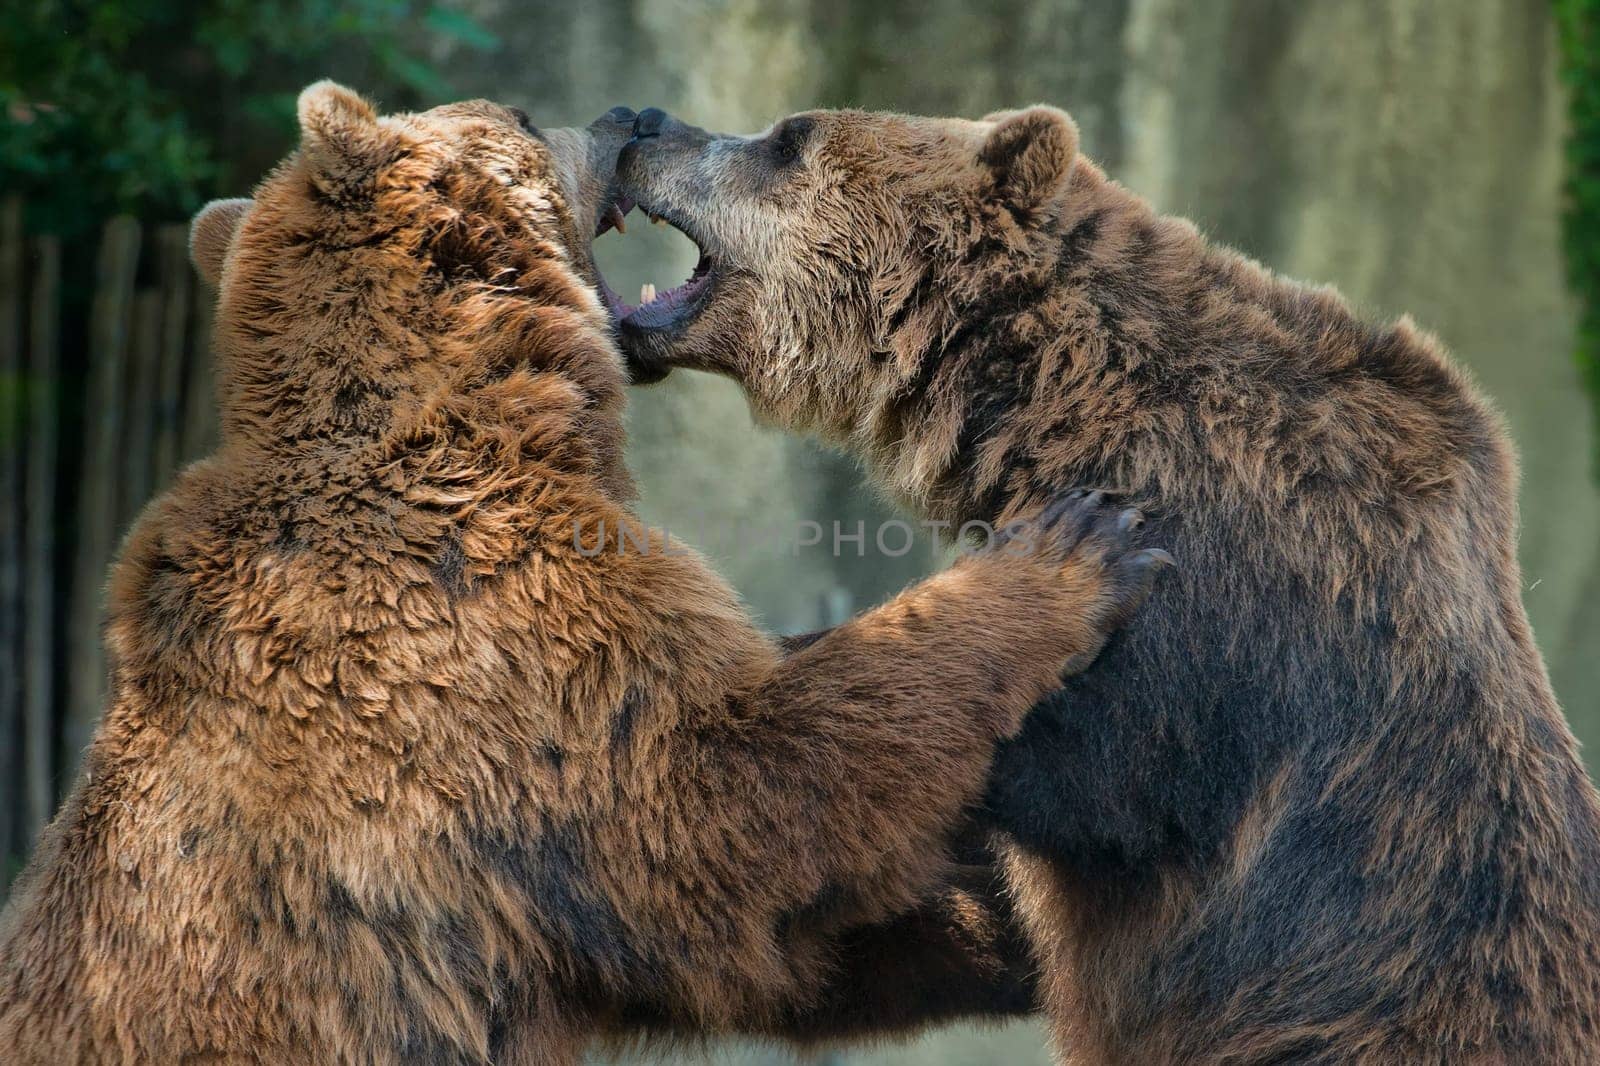 Two brown grizzly bears while fighting close up portrait